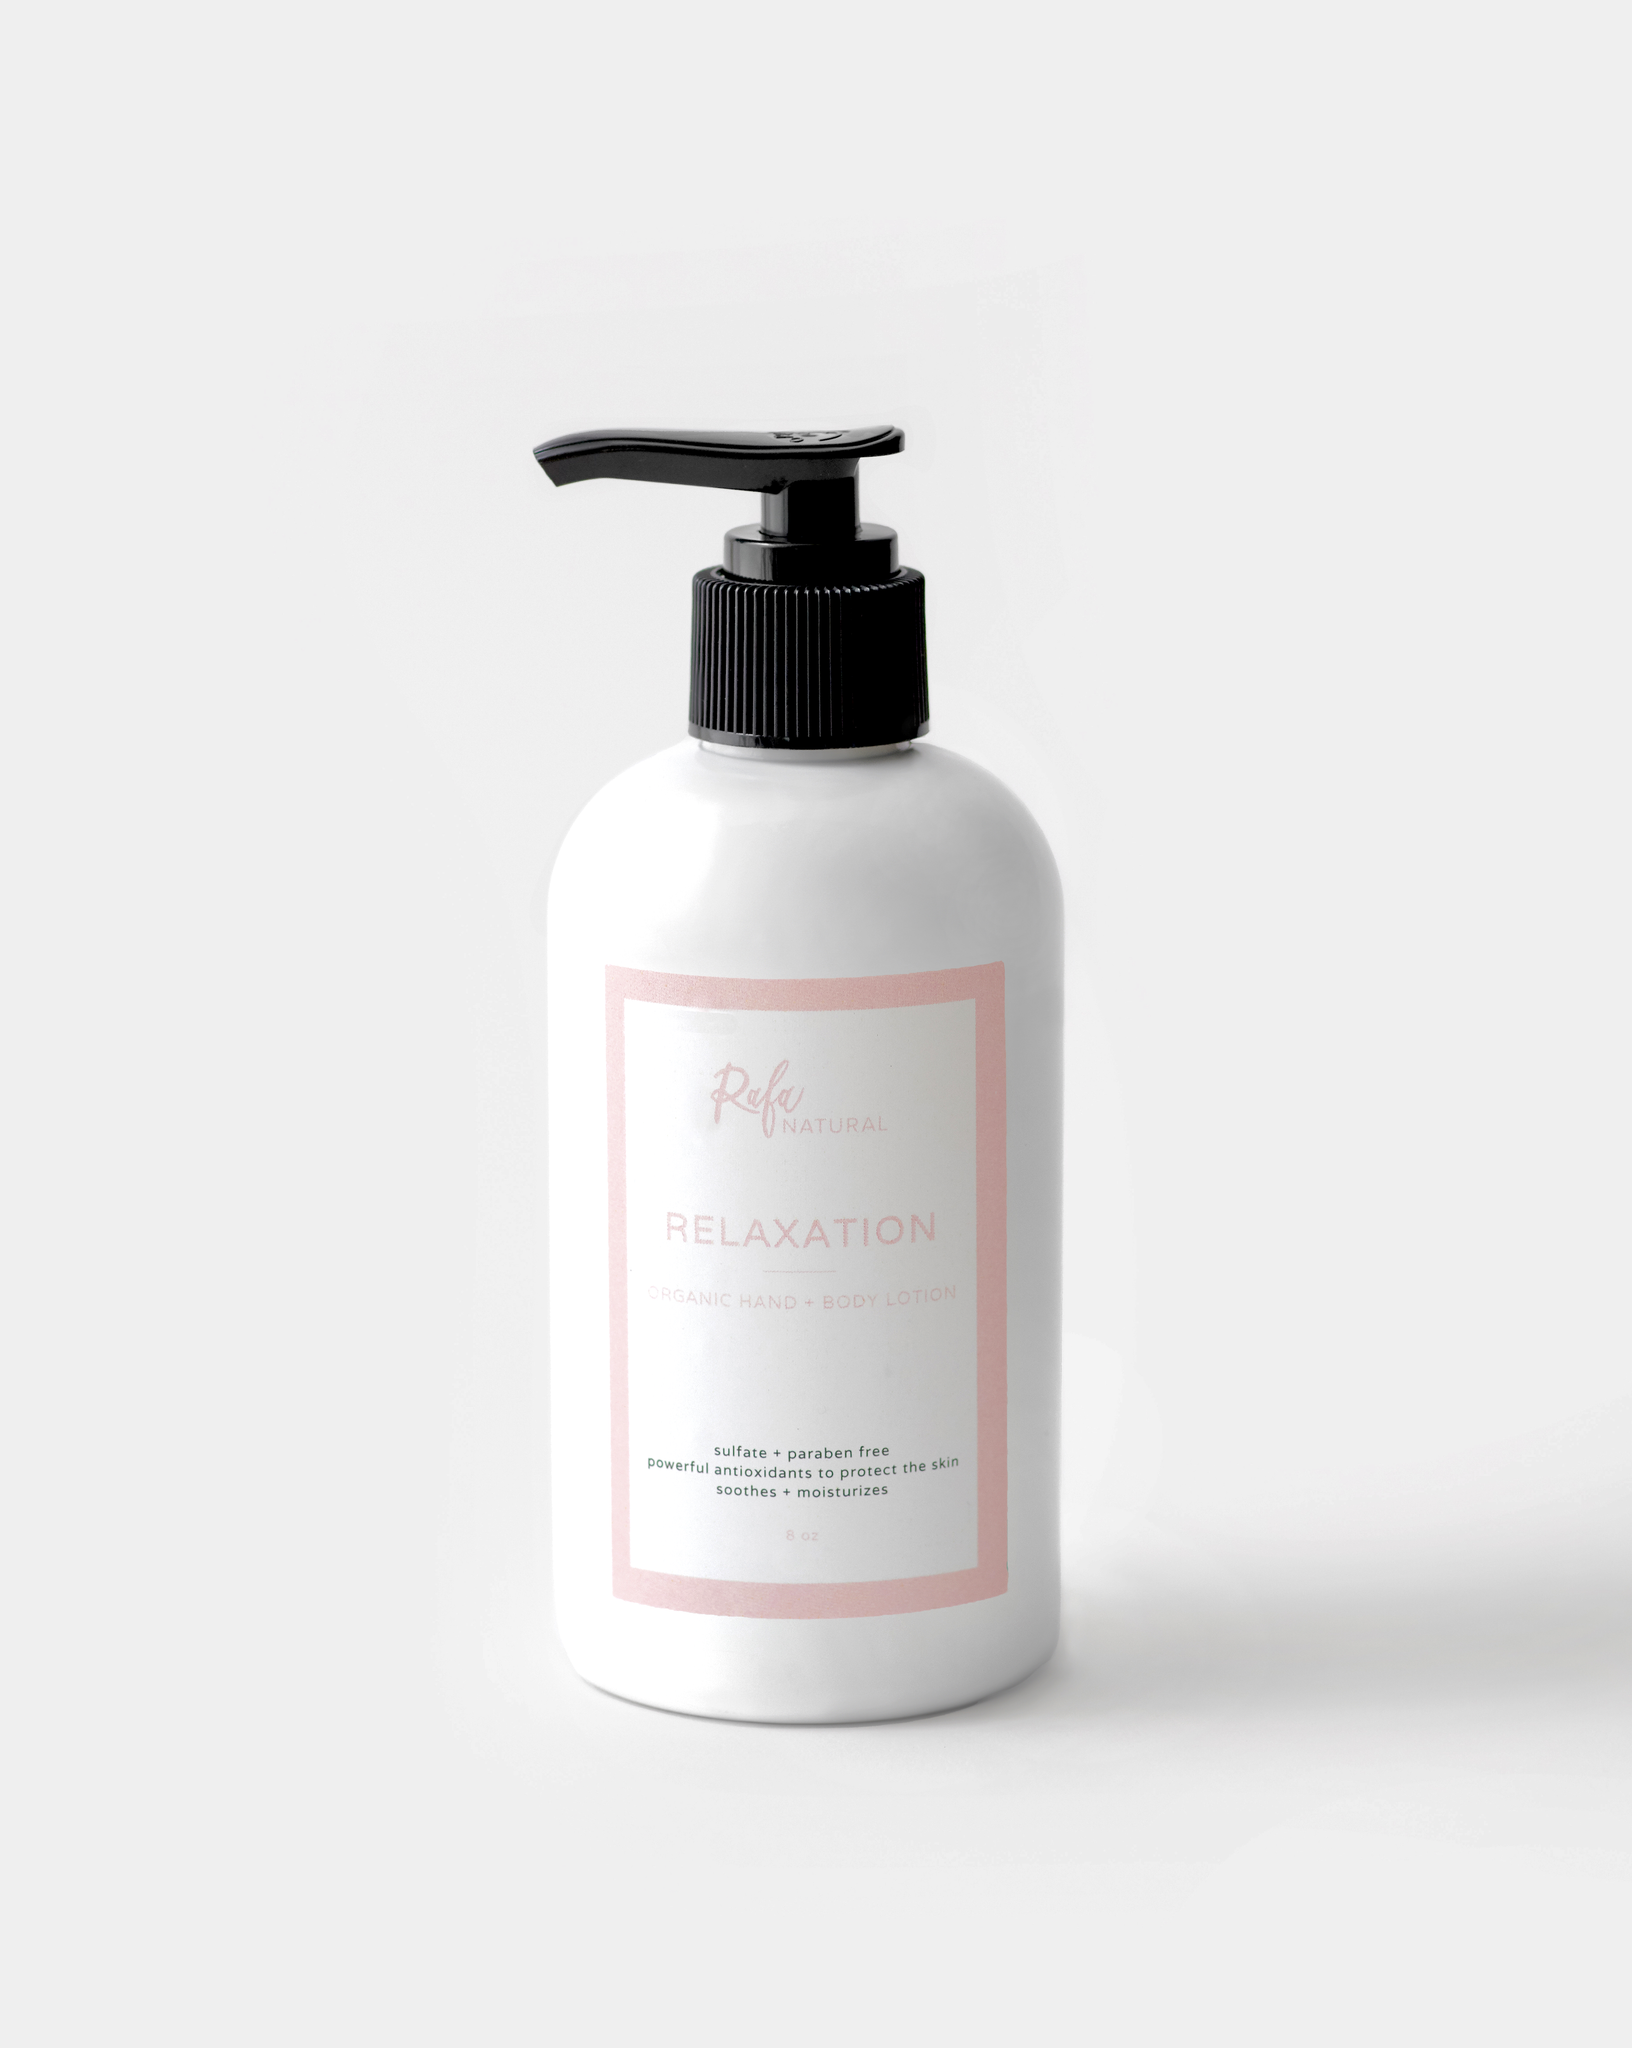 8oz. Relaxation Organic Hand + Body Lotion